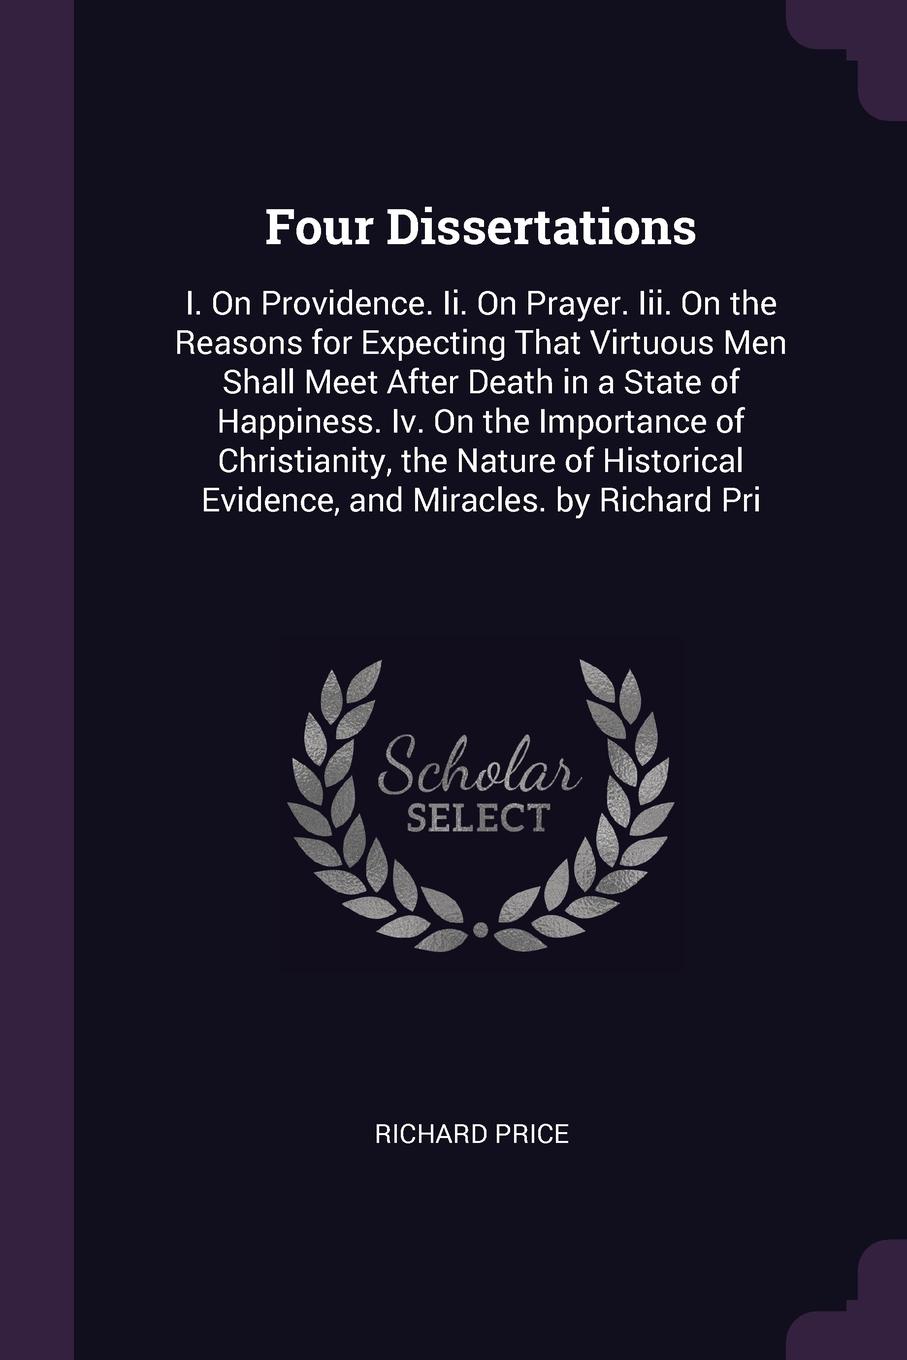 Four Dissertations. I. On Providence. Ii. On Prayer. Iii. On the Reasons for Expecting That Virtuous Men Shall Meet After Death in a State of Happiness. Iv. On the Importance of Christianity, the Nature of Historical Evidence, and Miracles. by Ric...